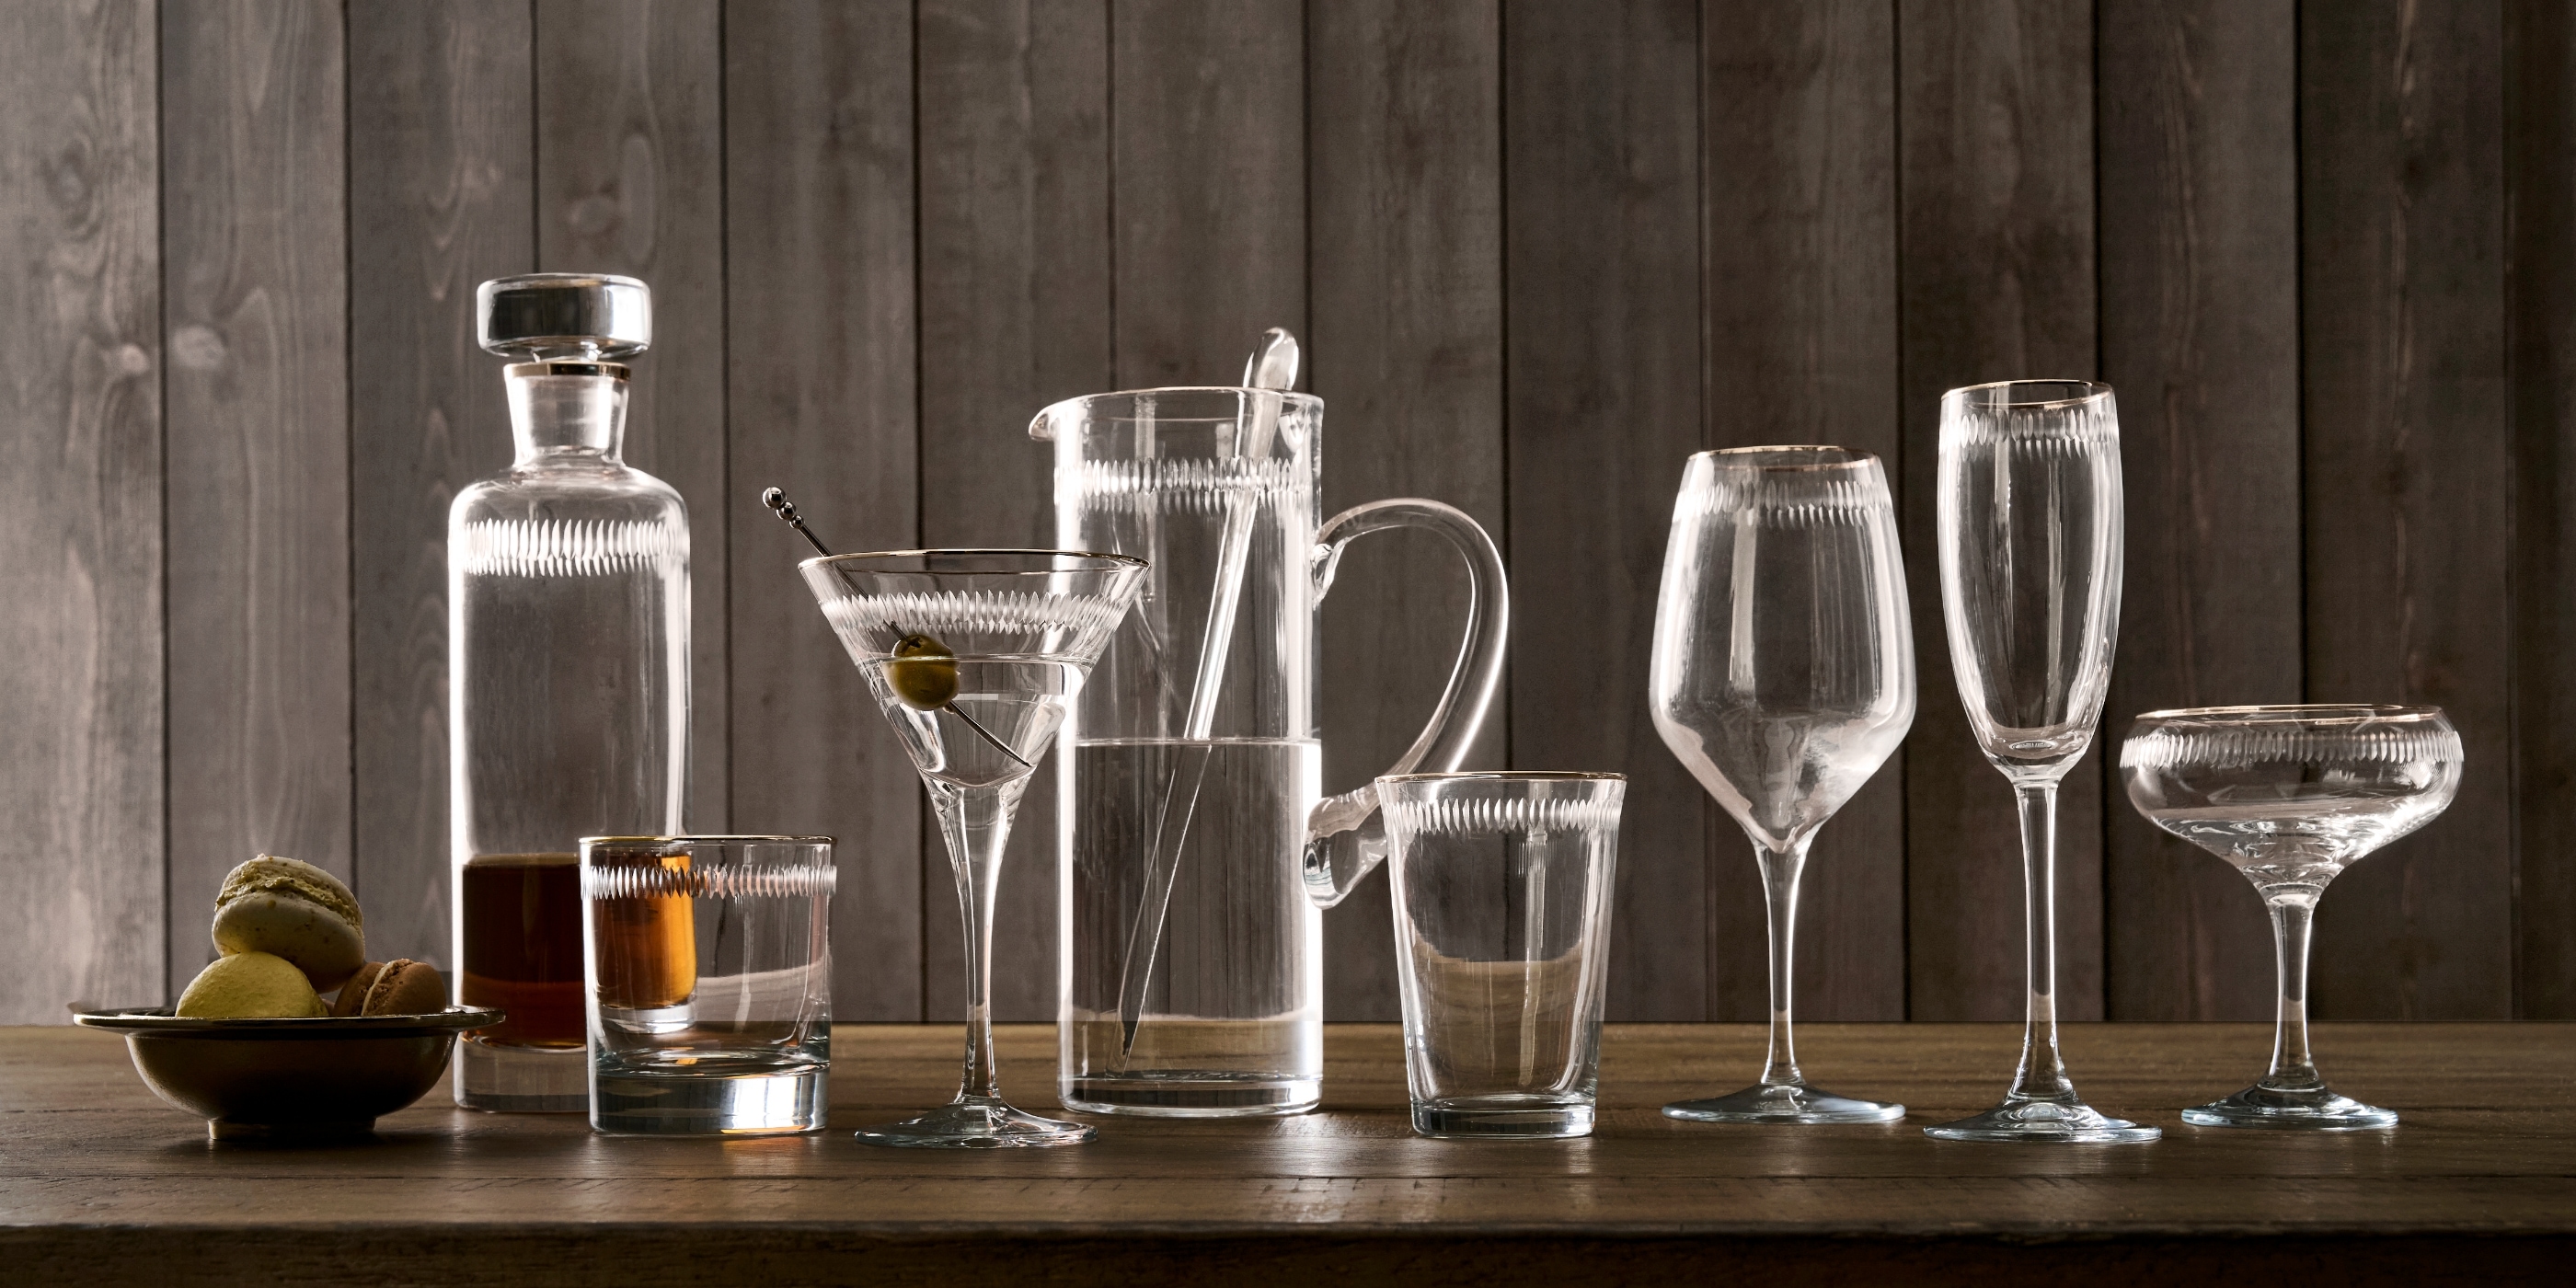 Etched Rim Glassware Collection